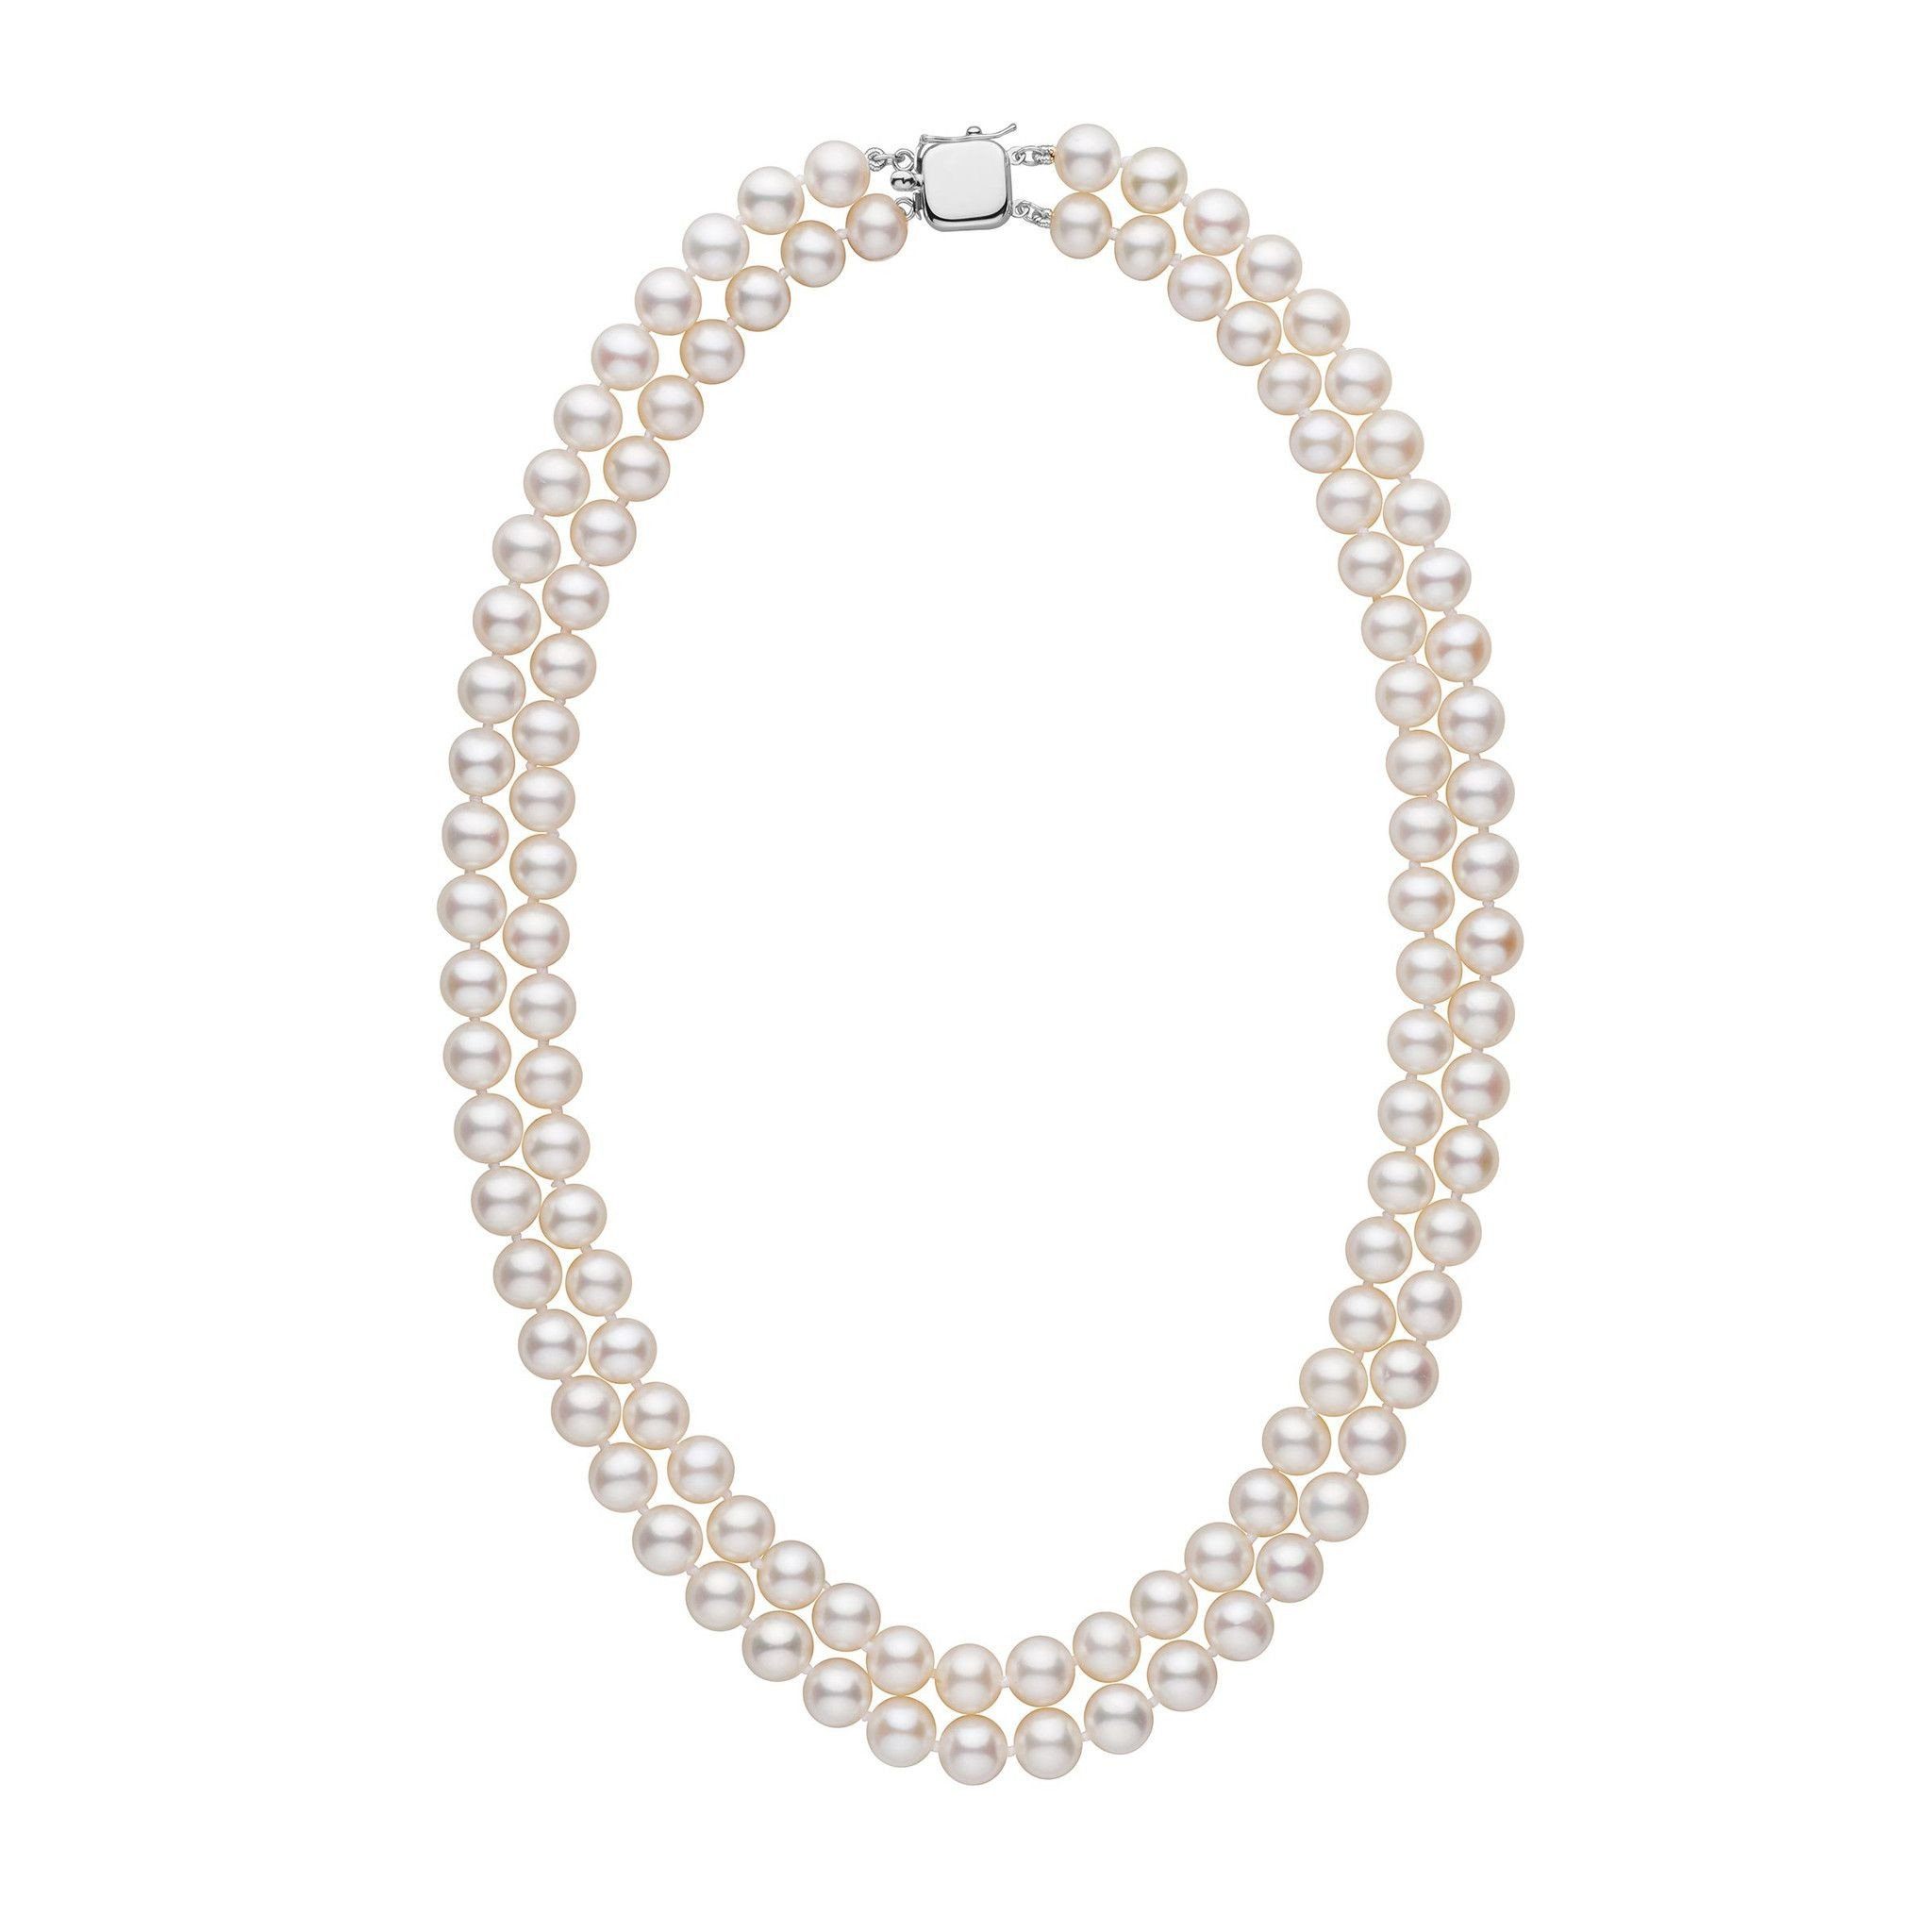 16 7.5-8mm Double Strand Pearl Necklace with 14K White Gold Decorative Clasp